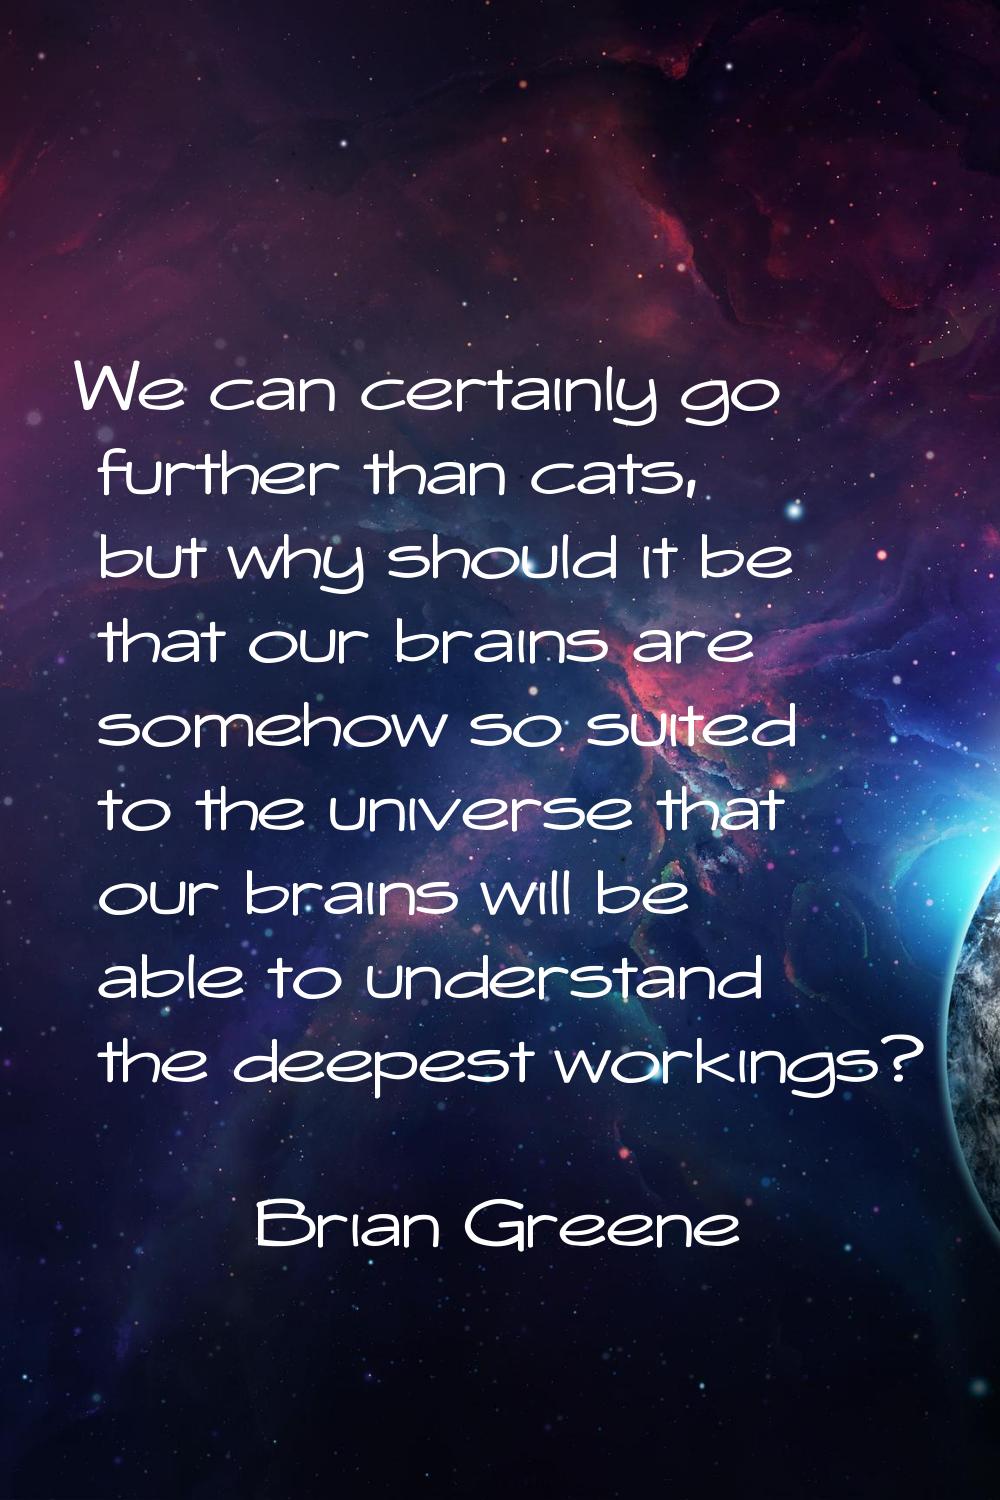 We can certainly go further than cats, but why should it be that our brains are somehow so suited t